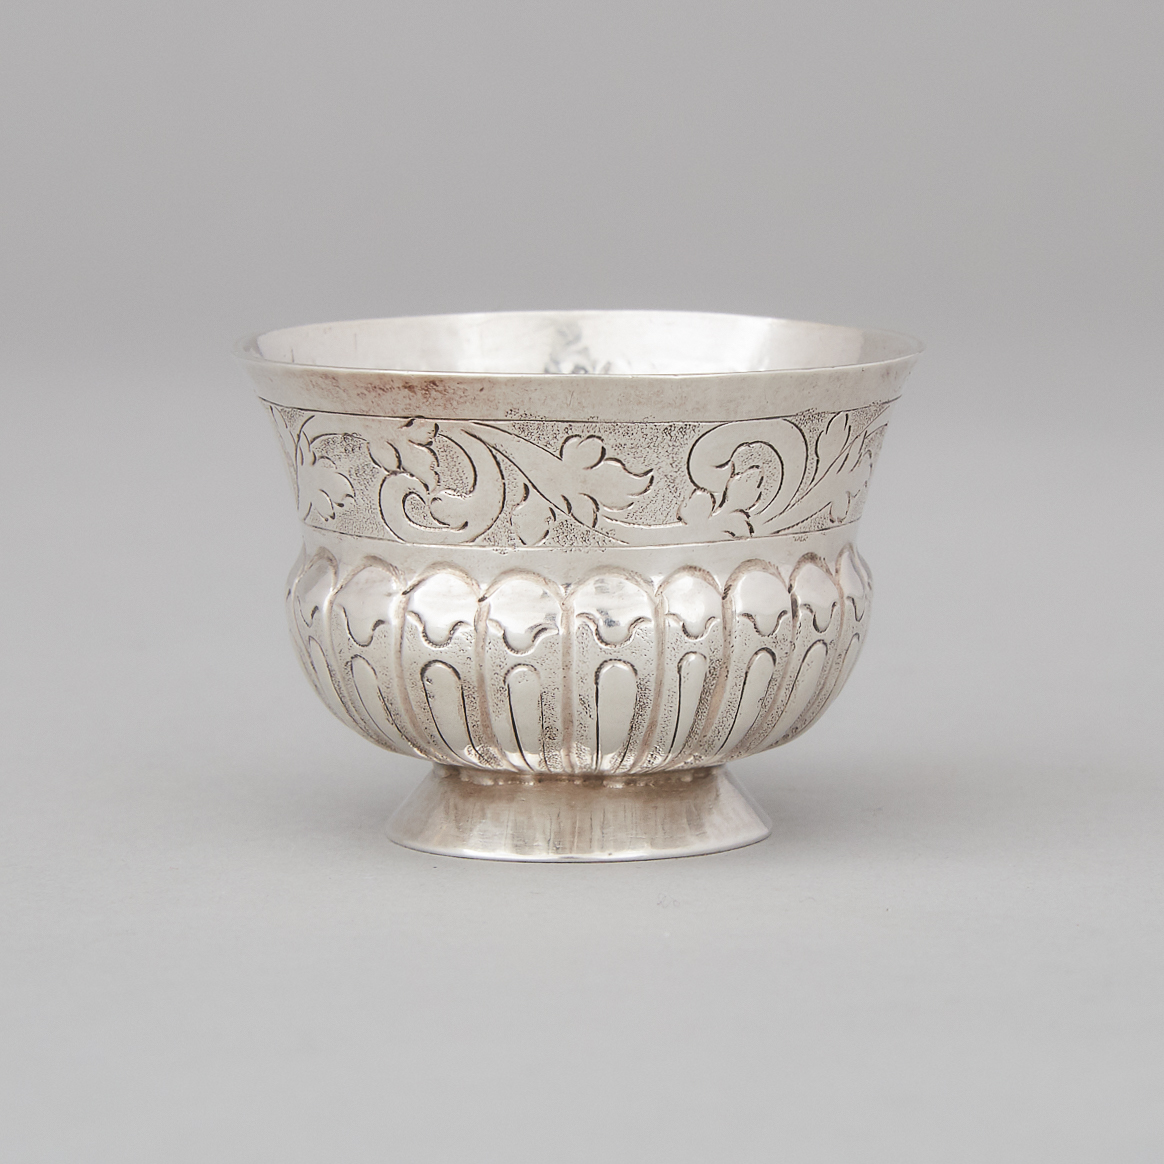 Russian Silver Charka, Moscow, mid-18th century